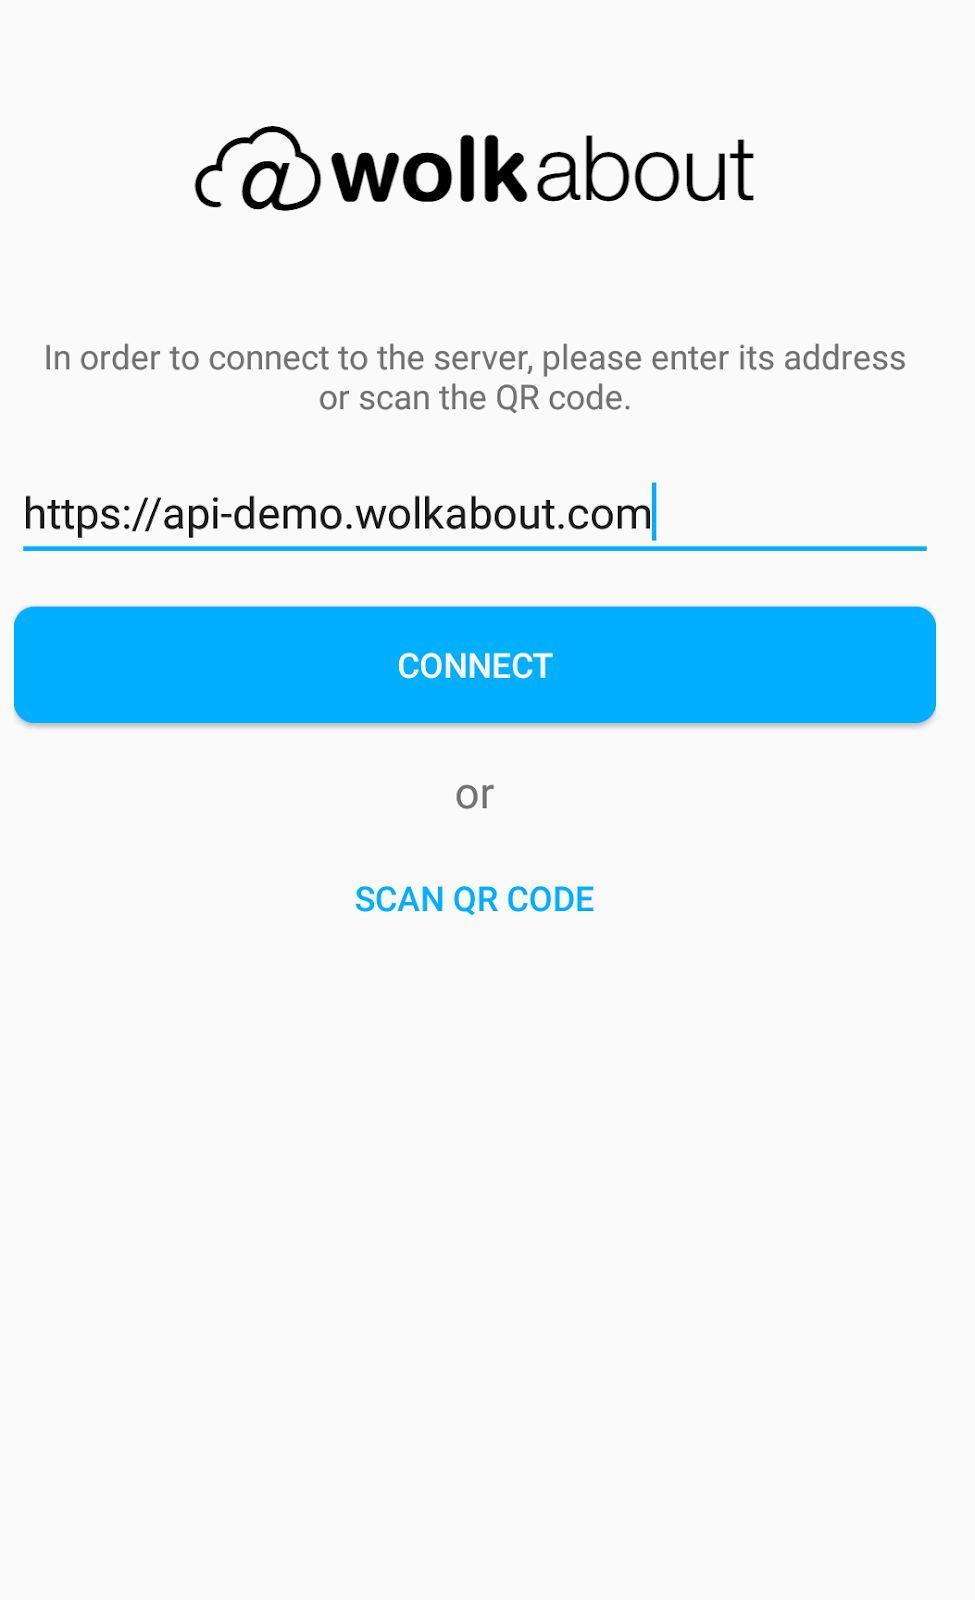 Mobile Application Installation and Configuration After verifying your account, you will receive a welcome email containing two links to download WolkAbout IoT Tool Mobile Application: App Store for